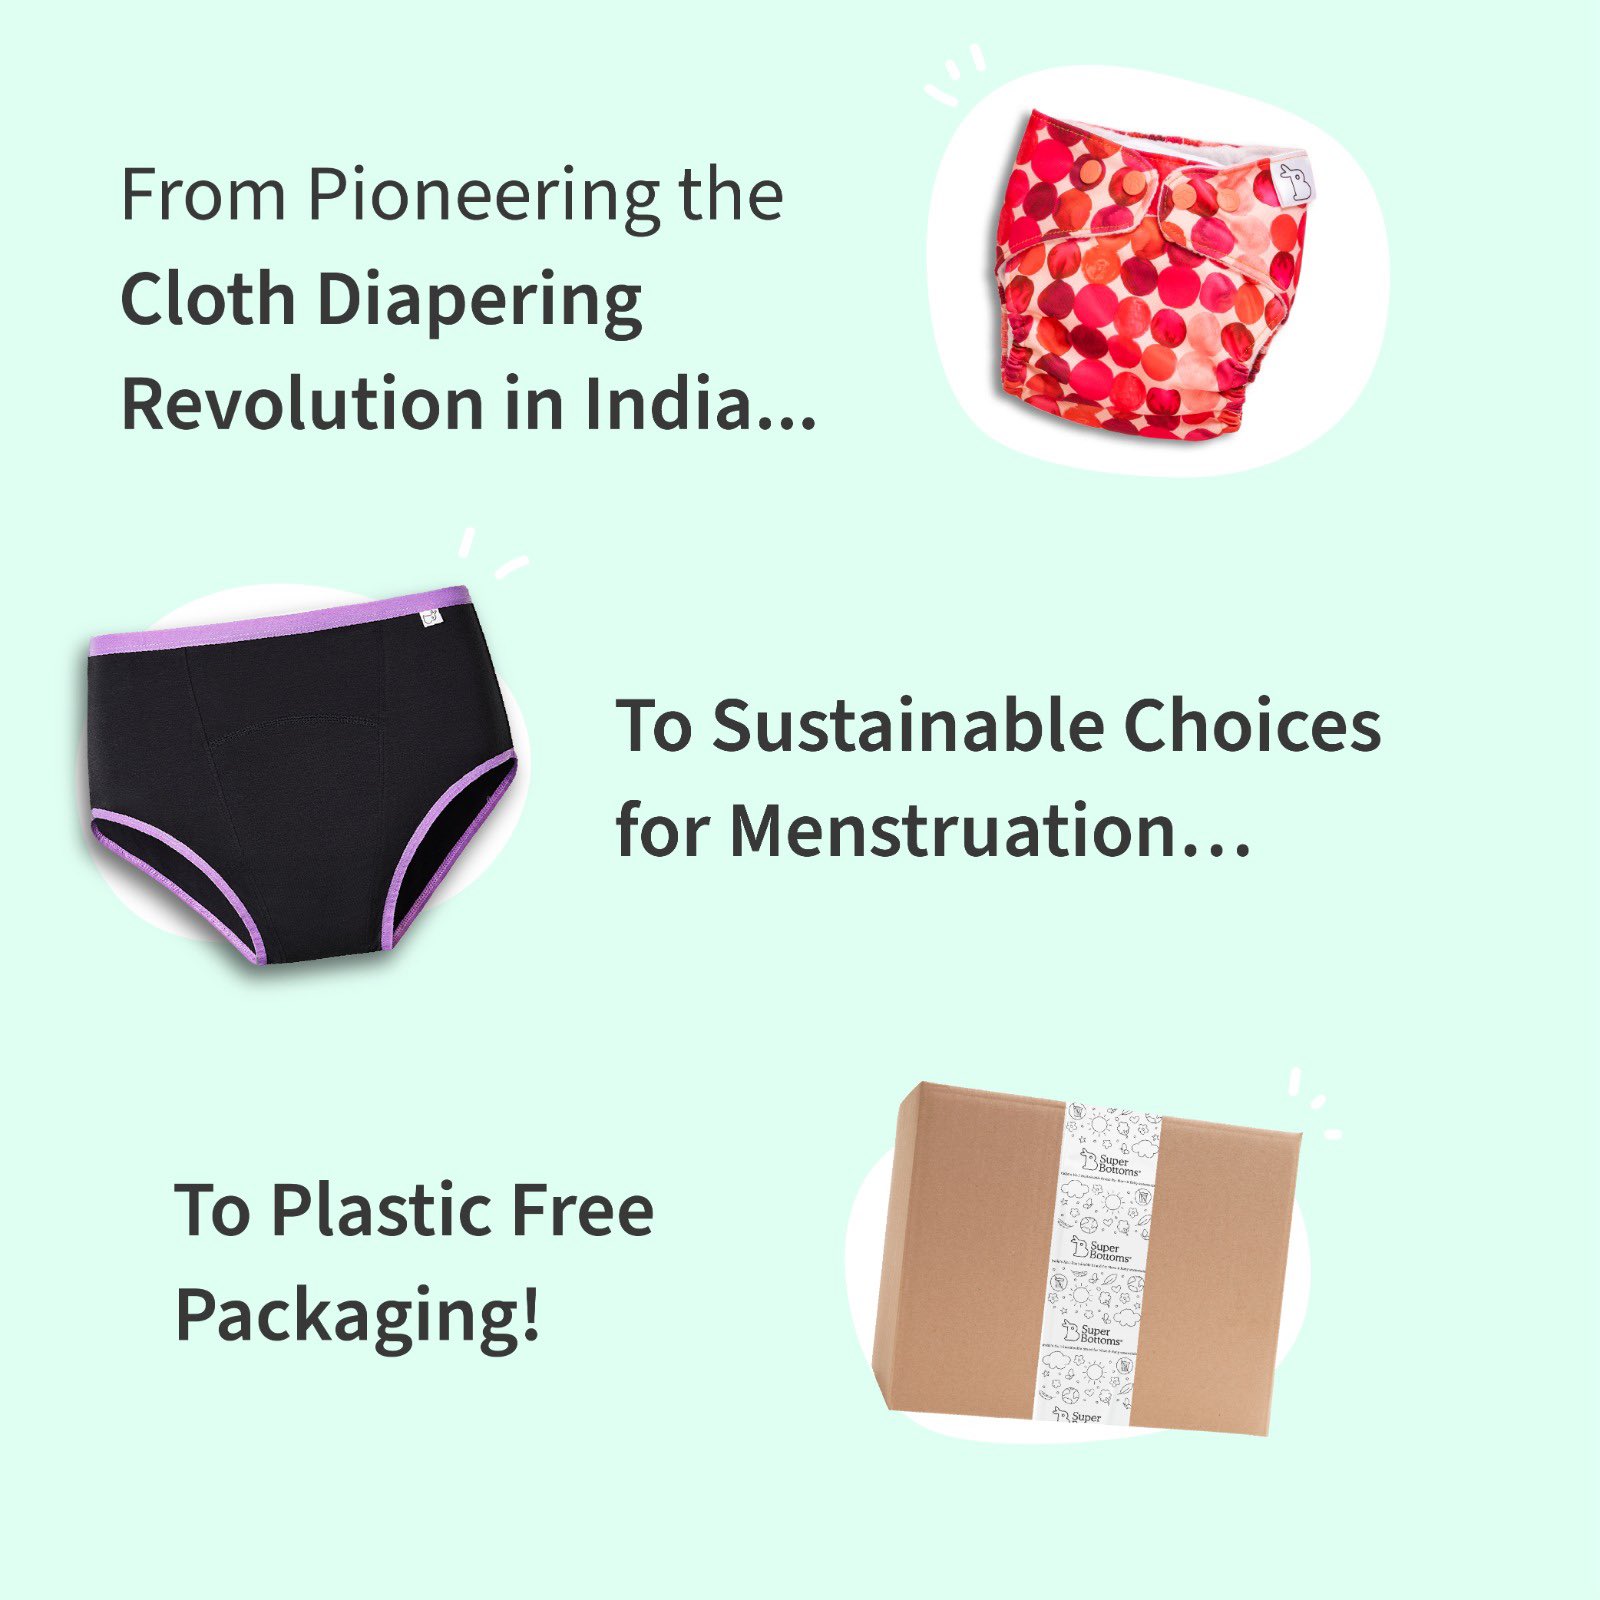 2 Period Underwear + 2 Cloth Pads + Free Pouch by SuperBottoms